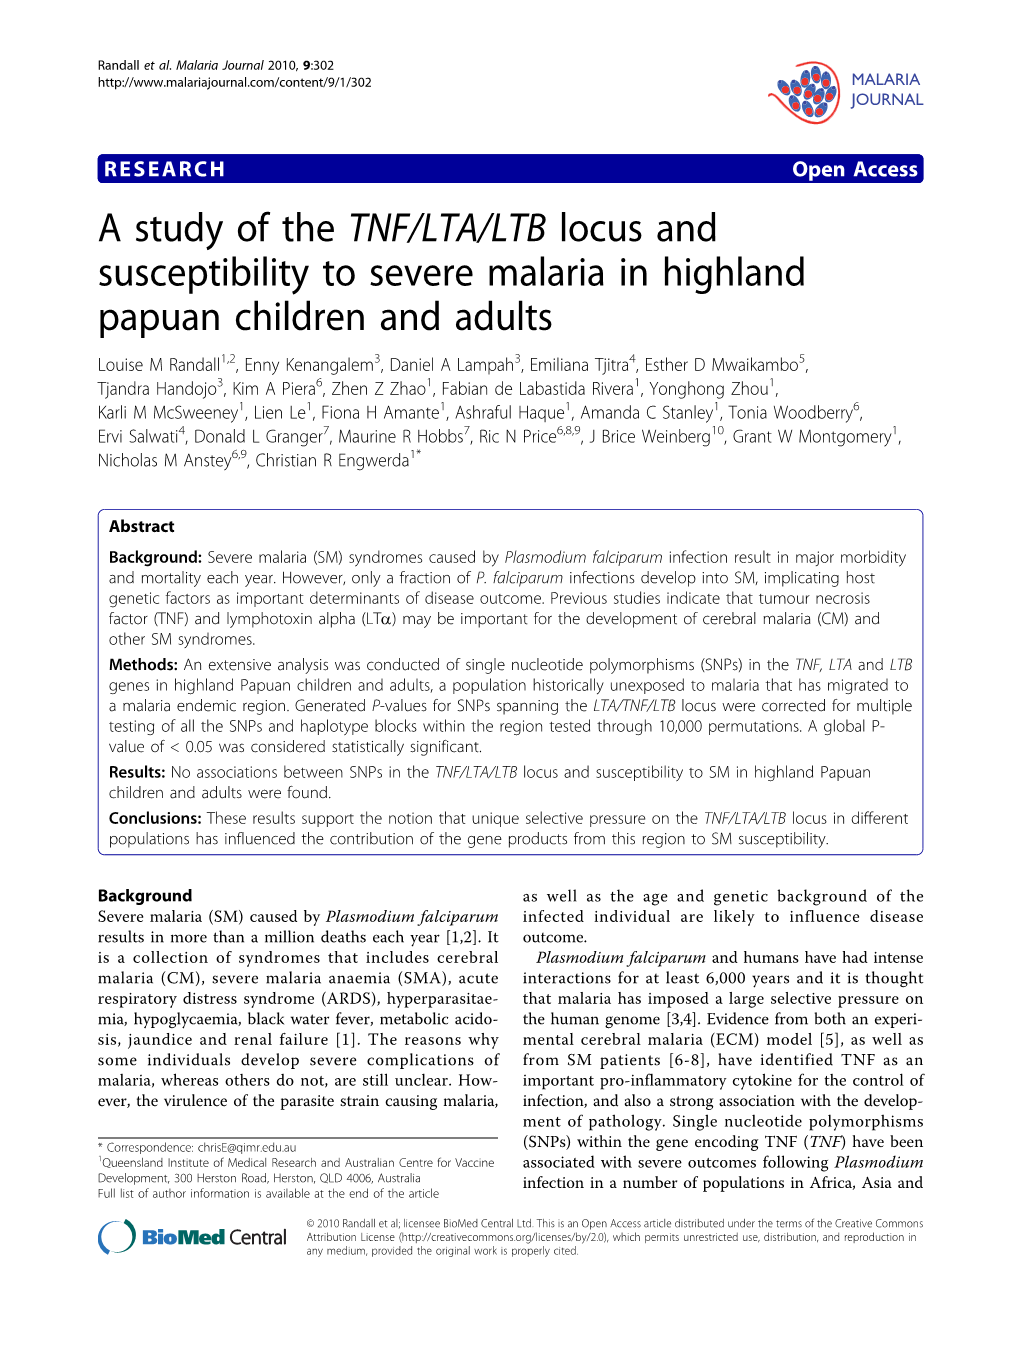 A Study of the TNF/LTA/LTB Locus and Susceptibility to Severe Malaria In